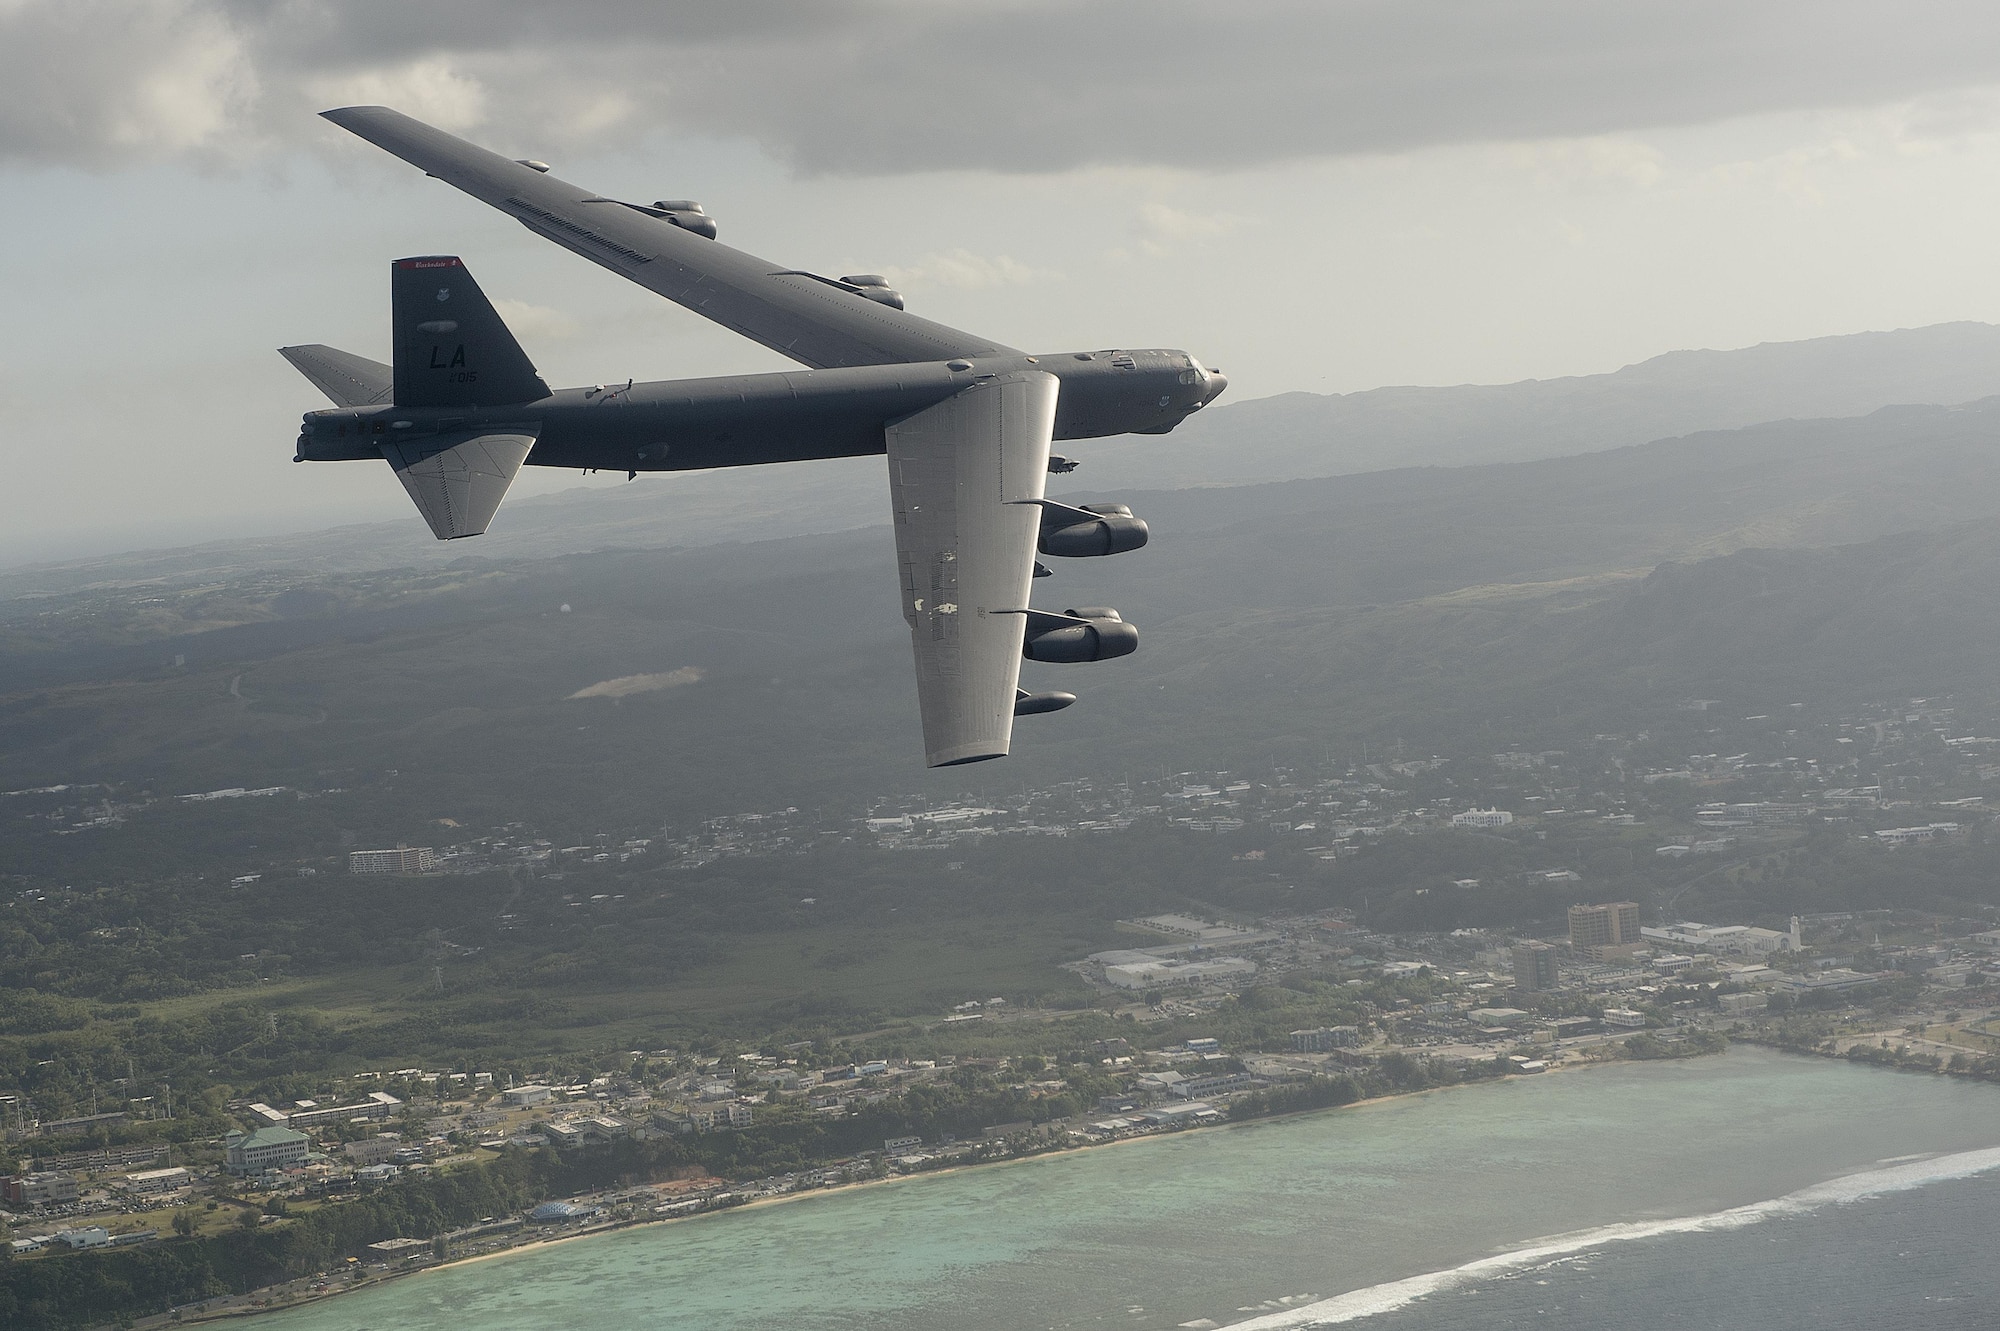 A B-52H Stratofortress flies during exercise Cope North 15, Feb. 17, 2015, off the coast of Guam. During the exercise, the U.S., Japan and Australia air forces worked on developing combat capabilities enhancing air superiority, electronic warfare, air interdiction, tactical airlift and aerial refueling. The B-52H is assigned to the 96th Expeditionary Bomb Squadron. (U.S. Air Force photo/Tech. Sgt. Jason Robertson)                                           